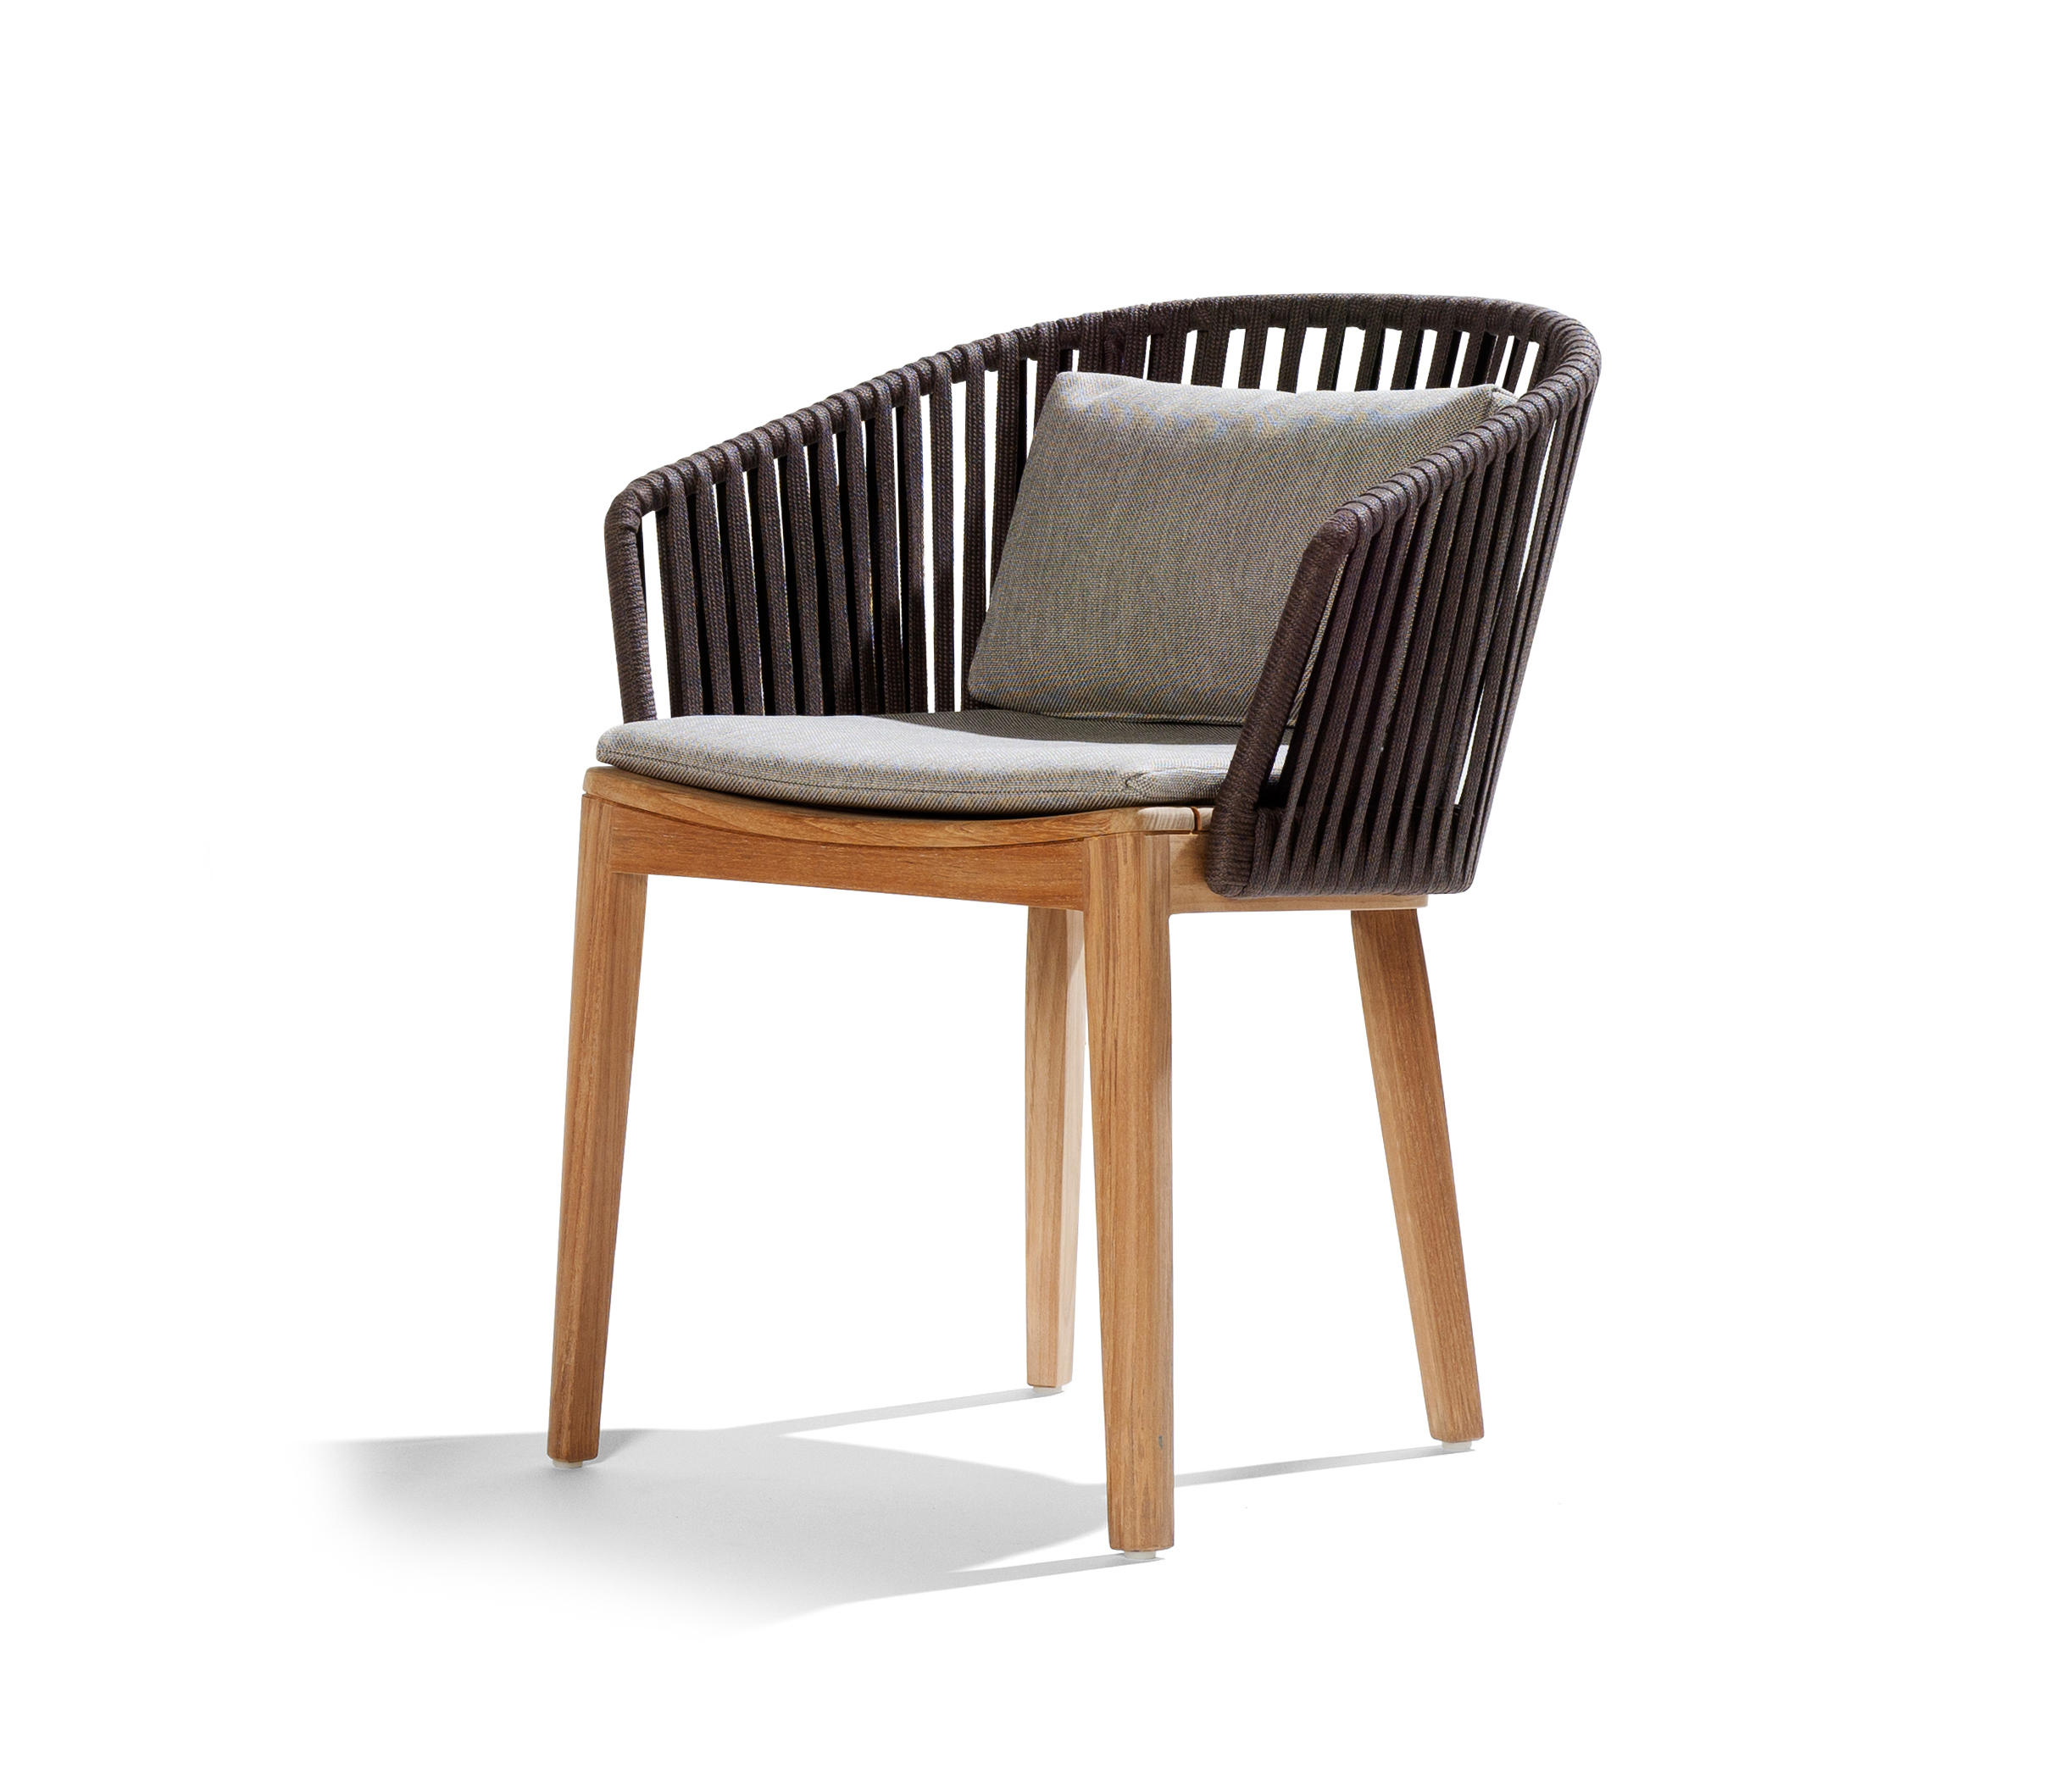 MOOD DINING CHAIR  TEAK  Garden chairs from Tribù 